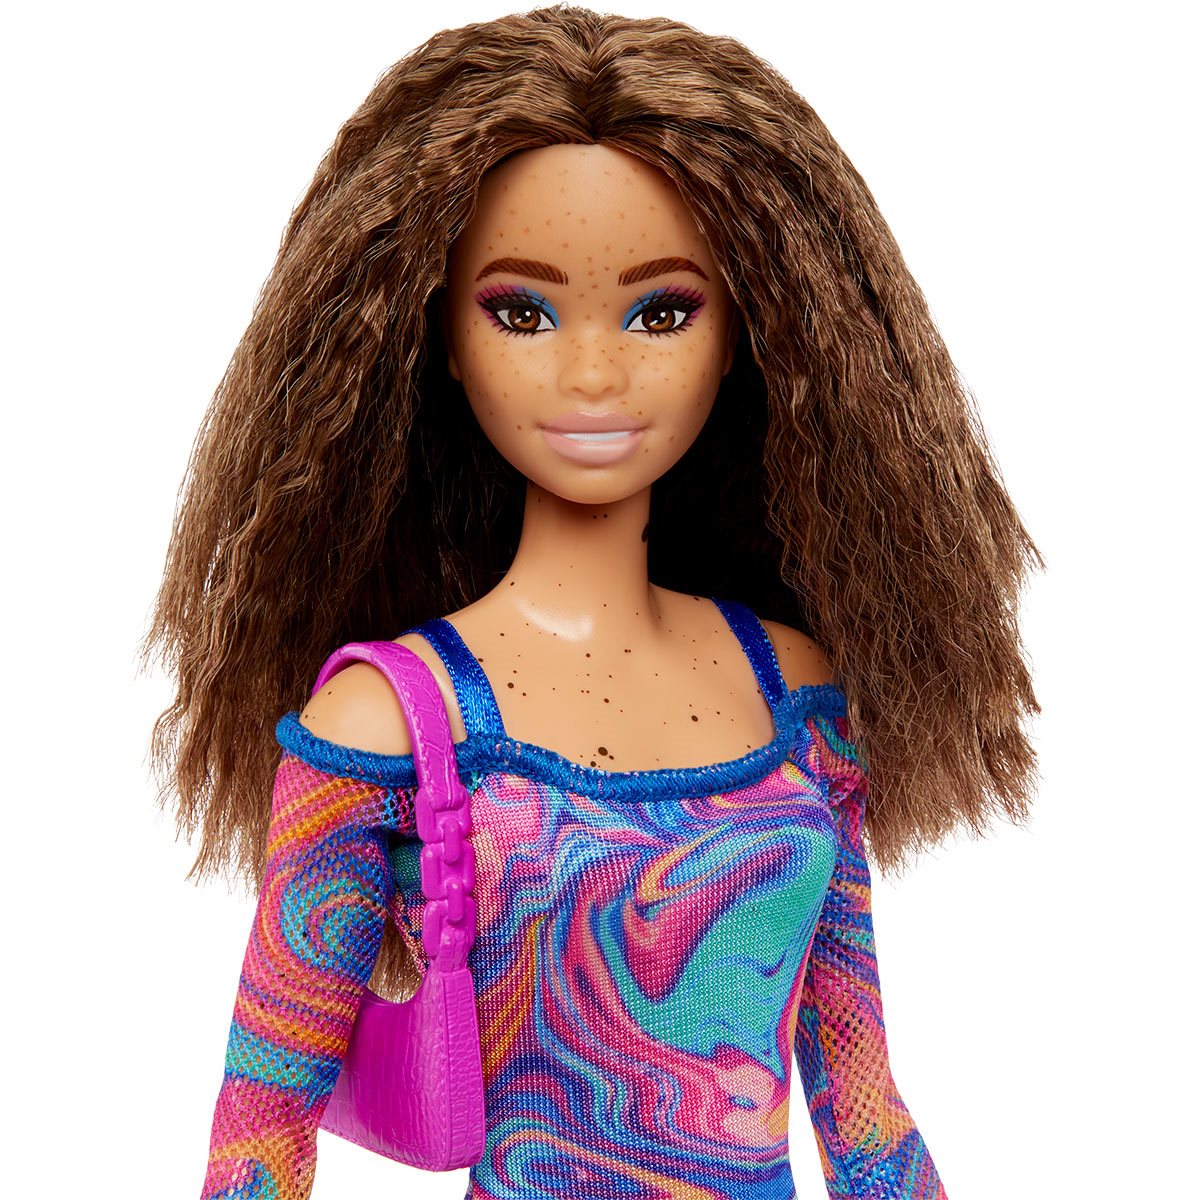 Black Barbie. Dolls may sound trivial, but it's…